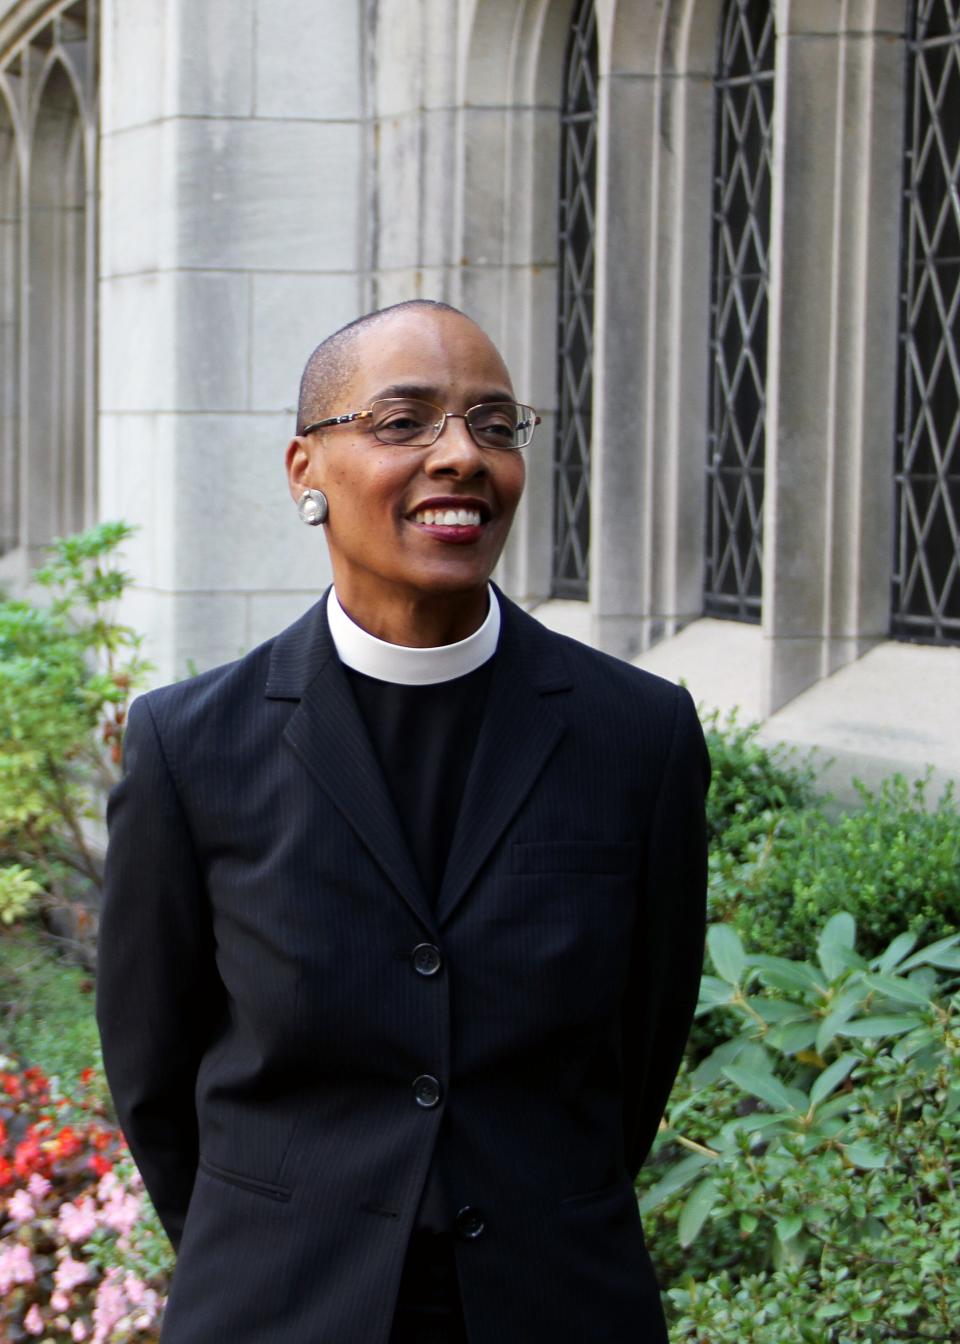 The Very Rev. Dr. Kelly Brown Douglas is the dean of Episcopal Divinity School at Union Theological Seminary. She focuses studies on womanist theology and helped add gender-neutral language to the church's texts.